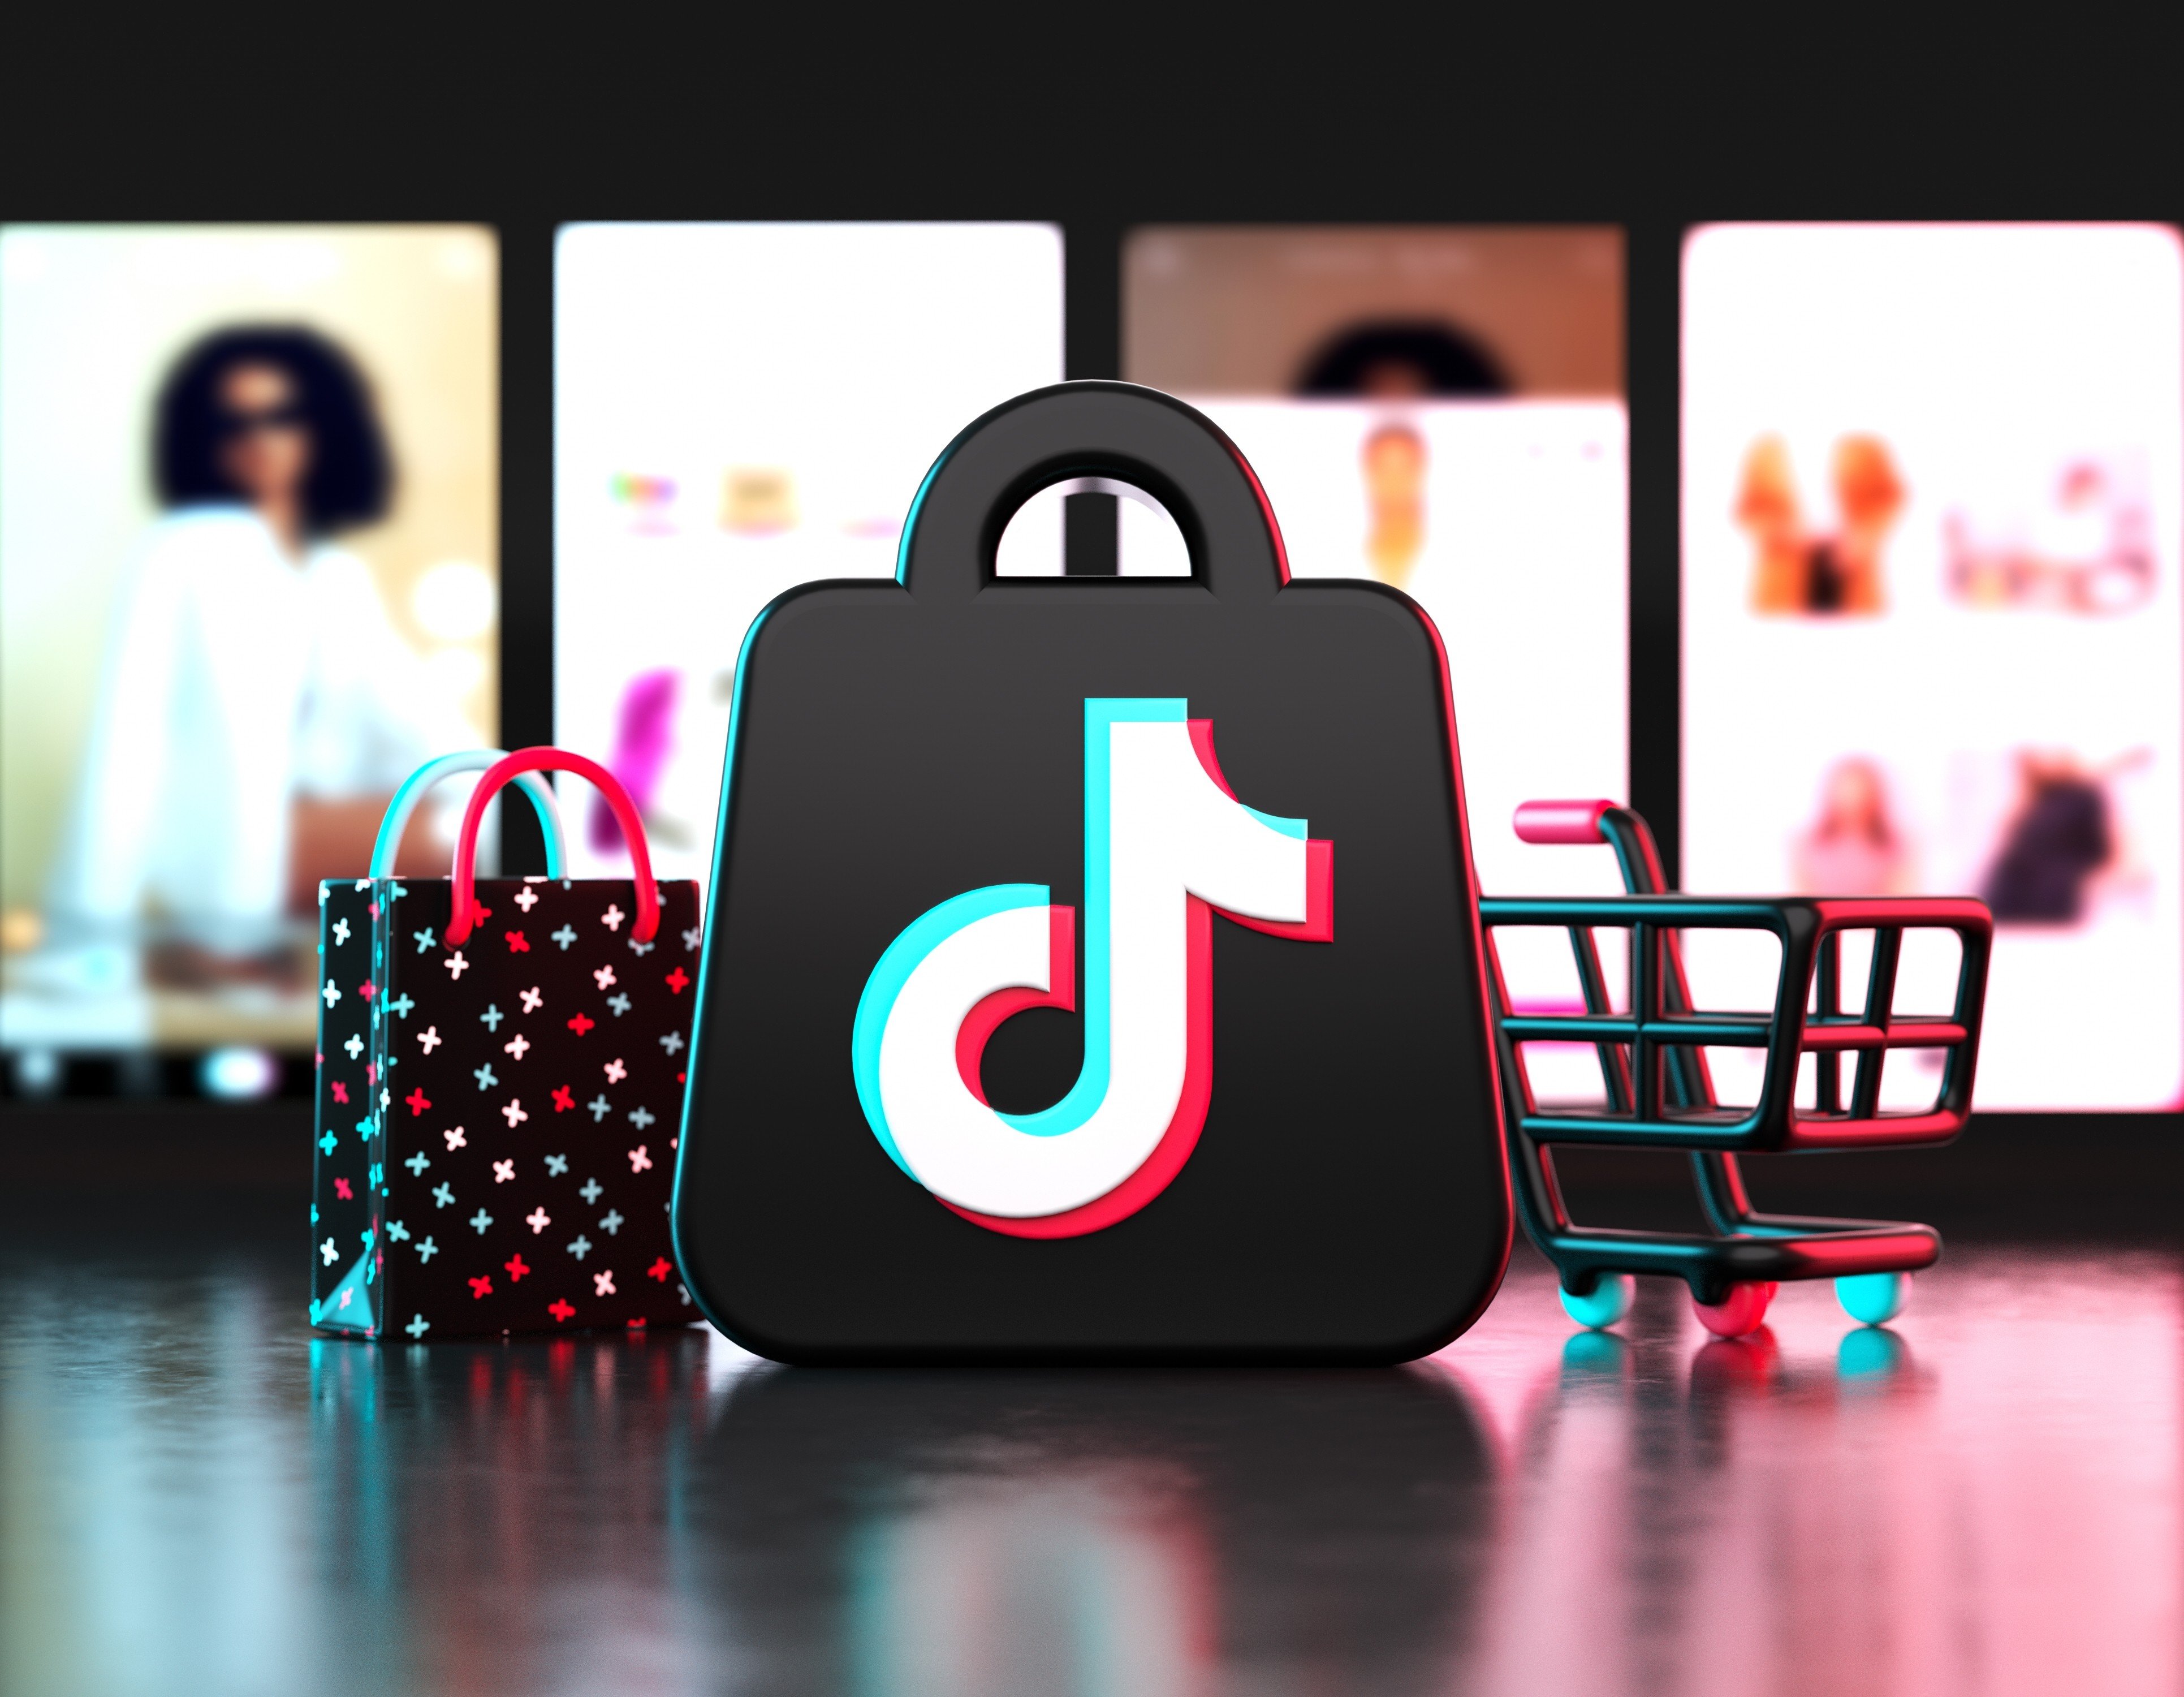 What sets Douyin Mall apart from TikTok Shop is that ByteDance has made it an independent app that competes head-on against larger mainland rivals such as Alibaba’s Taobao and Tmall, JD.com and Pinduoduo. Photo: Shutterstock